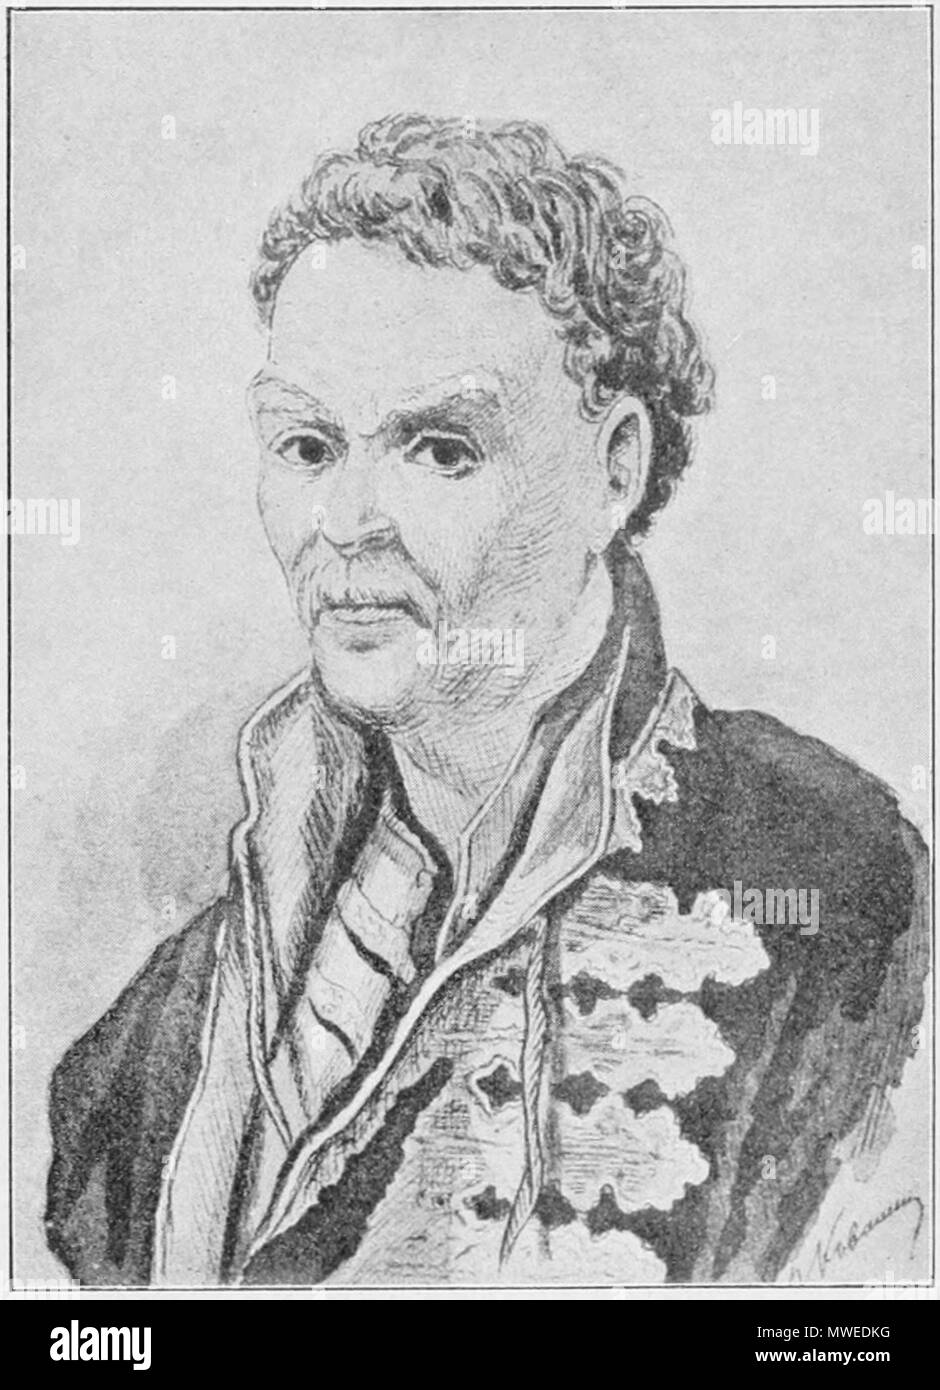 Alleged portrait Black and White Stock Photos & Images - Alamy